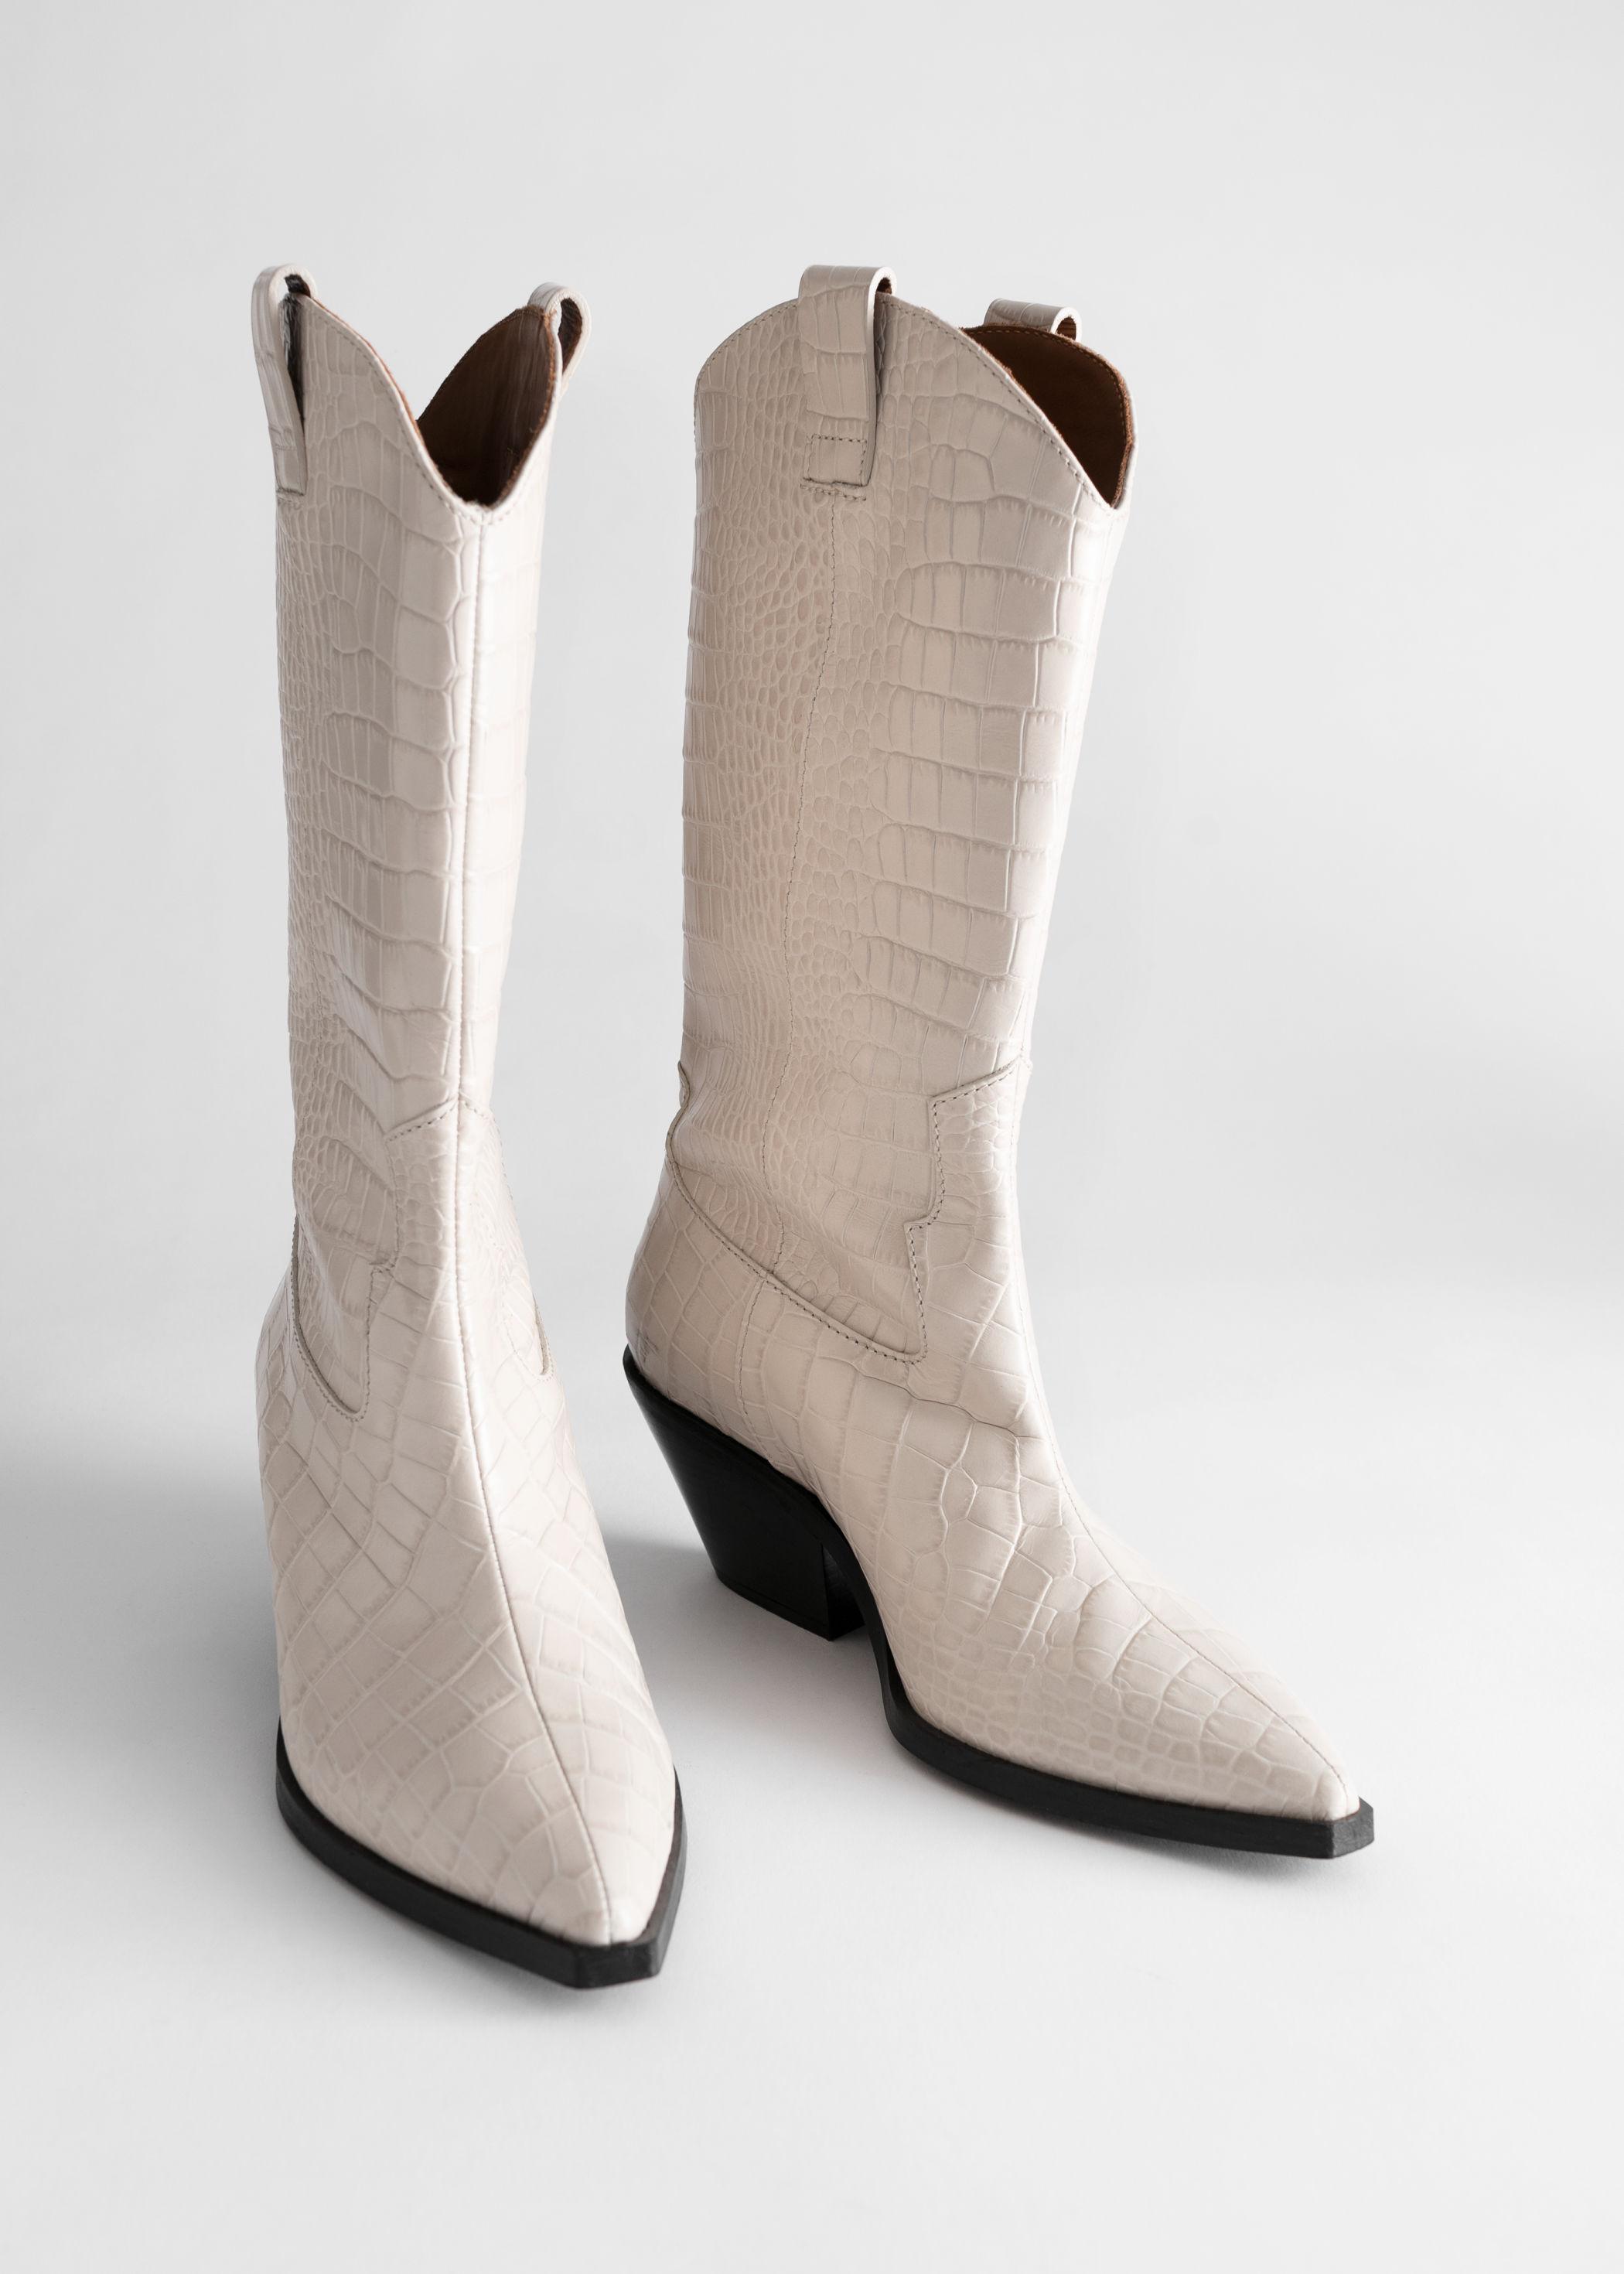 & Other Stories Croc Embossed Leather Cowboy Boots in White | Lyst